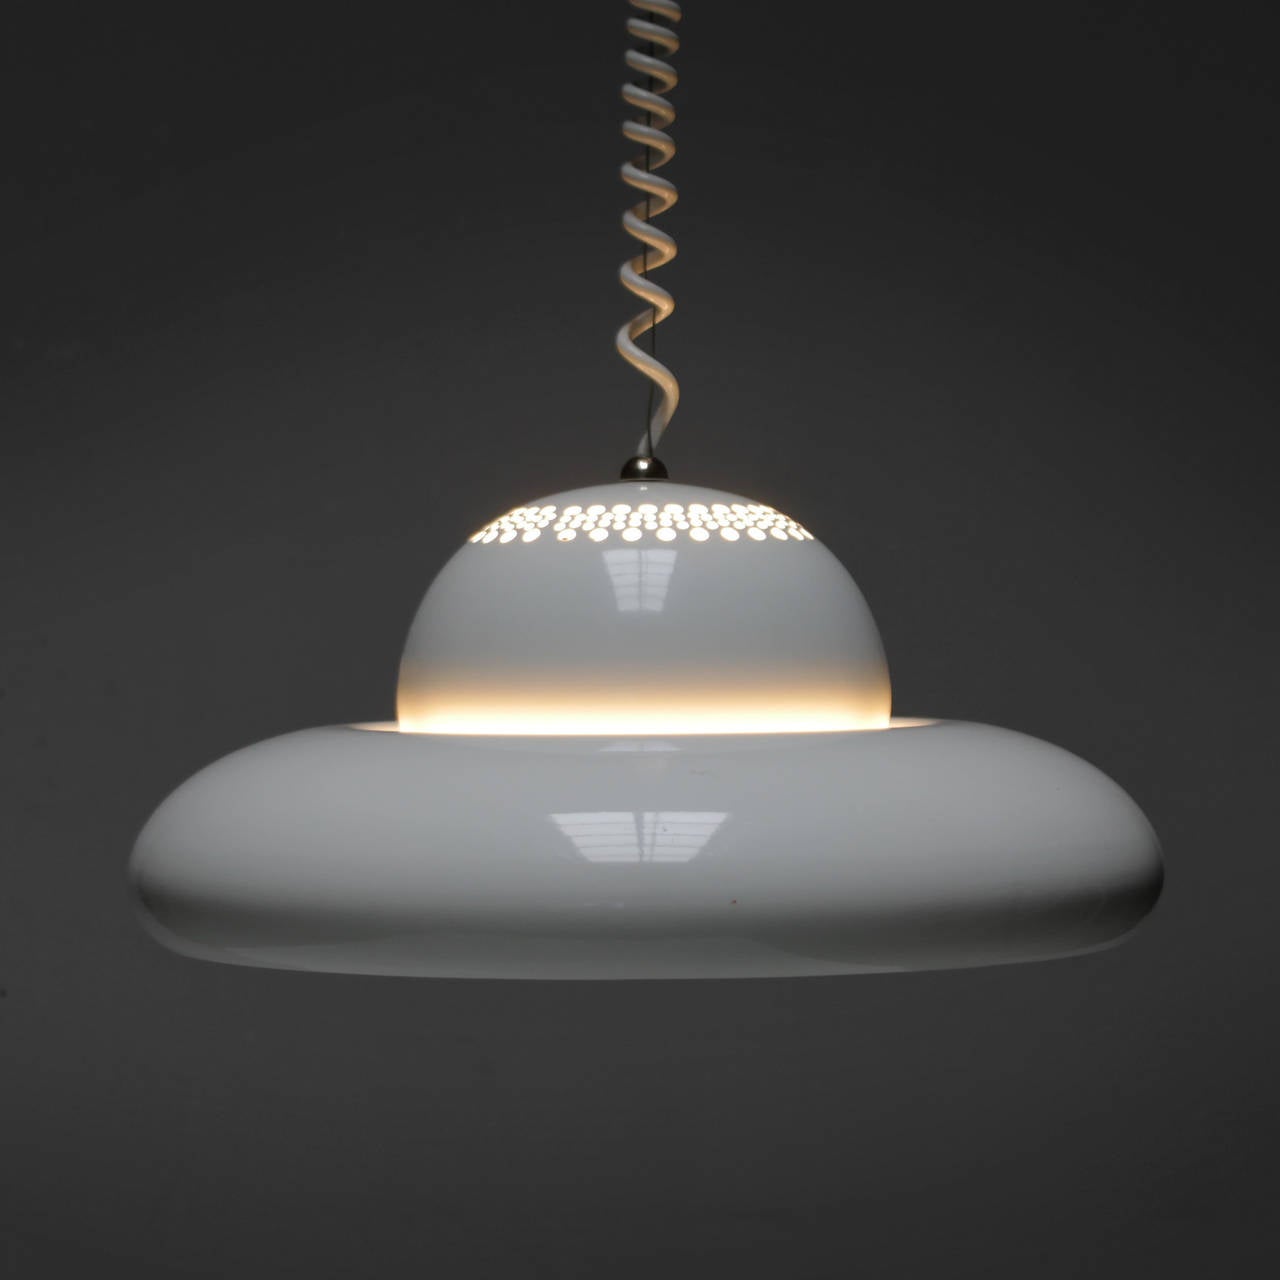 Unique Pendant Light by Afra & Tobia Scarpa. Like new, comes in original box.

The Fior di Loto (Lotus Flower) ceiling fixture was designed at the same time as the slightly larger Nictea and is one of the first models ever produced by the